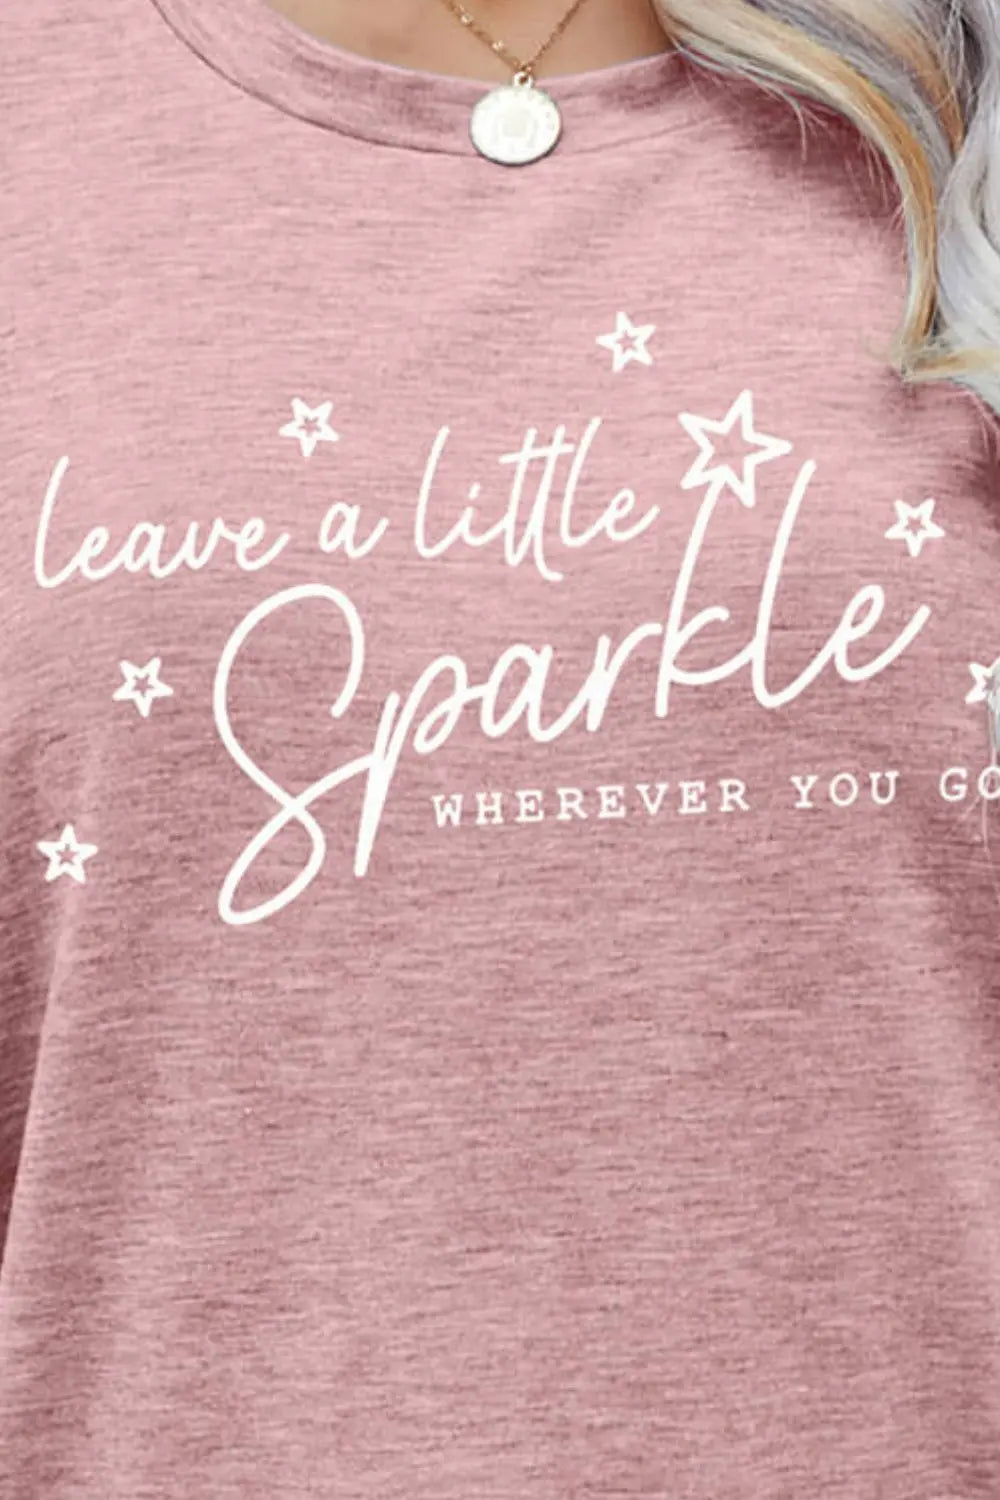 LEAVE A LITTLE SPARKLE WHEREVER YOU GO Tee Shirt - Image #15